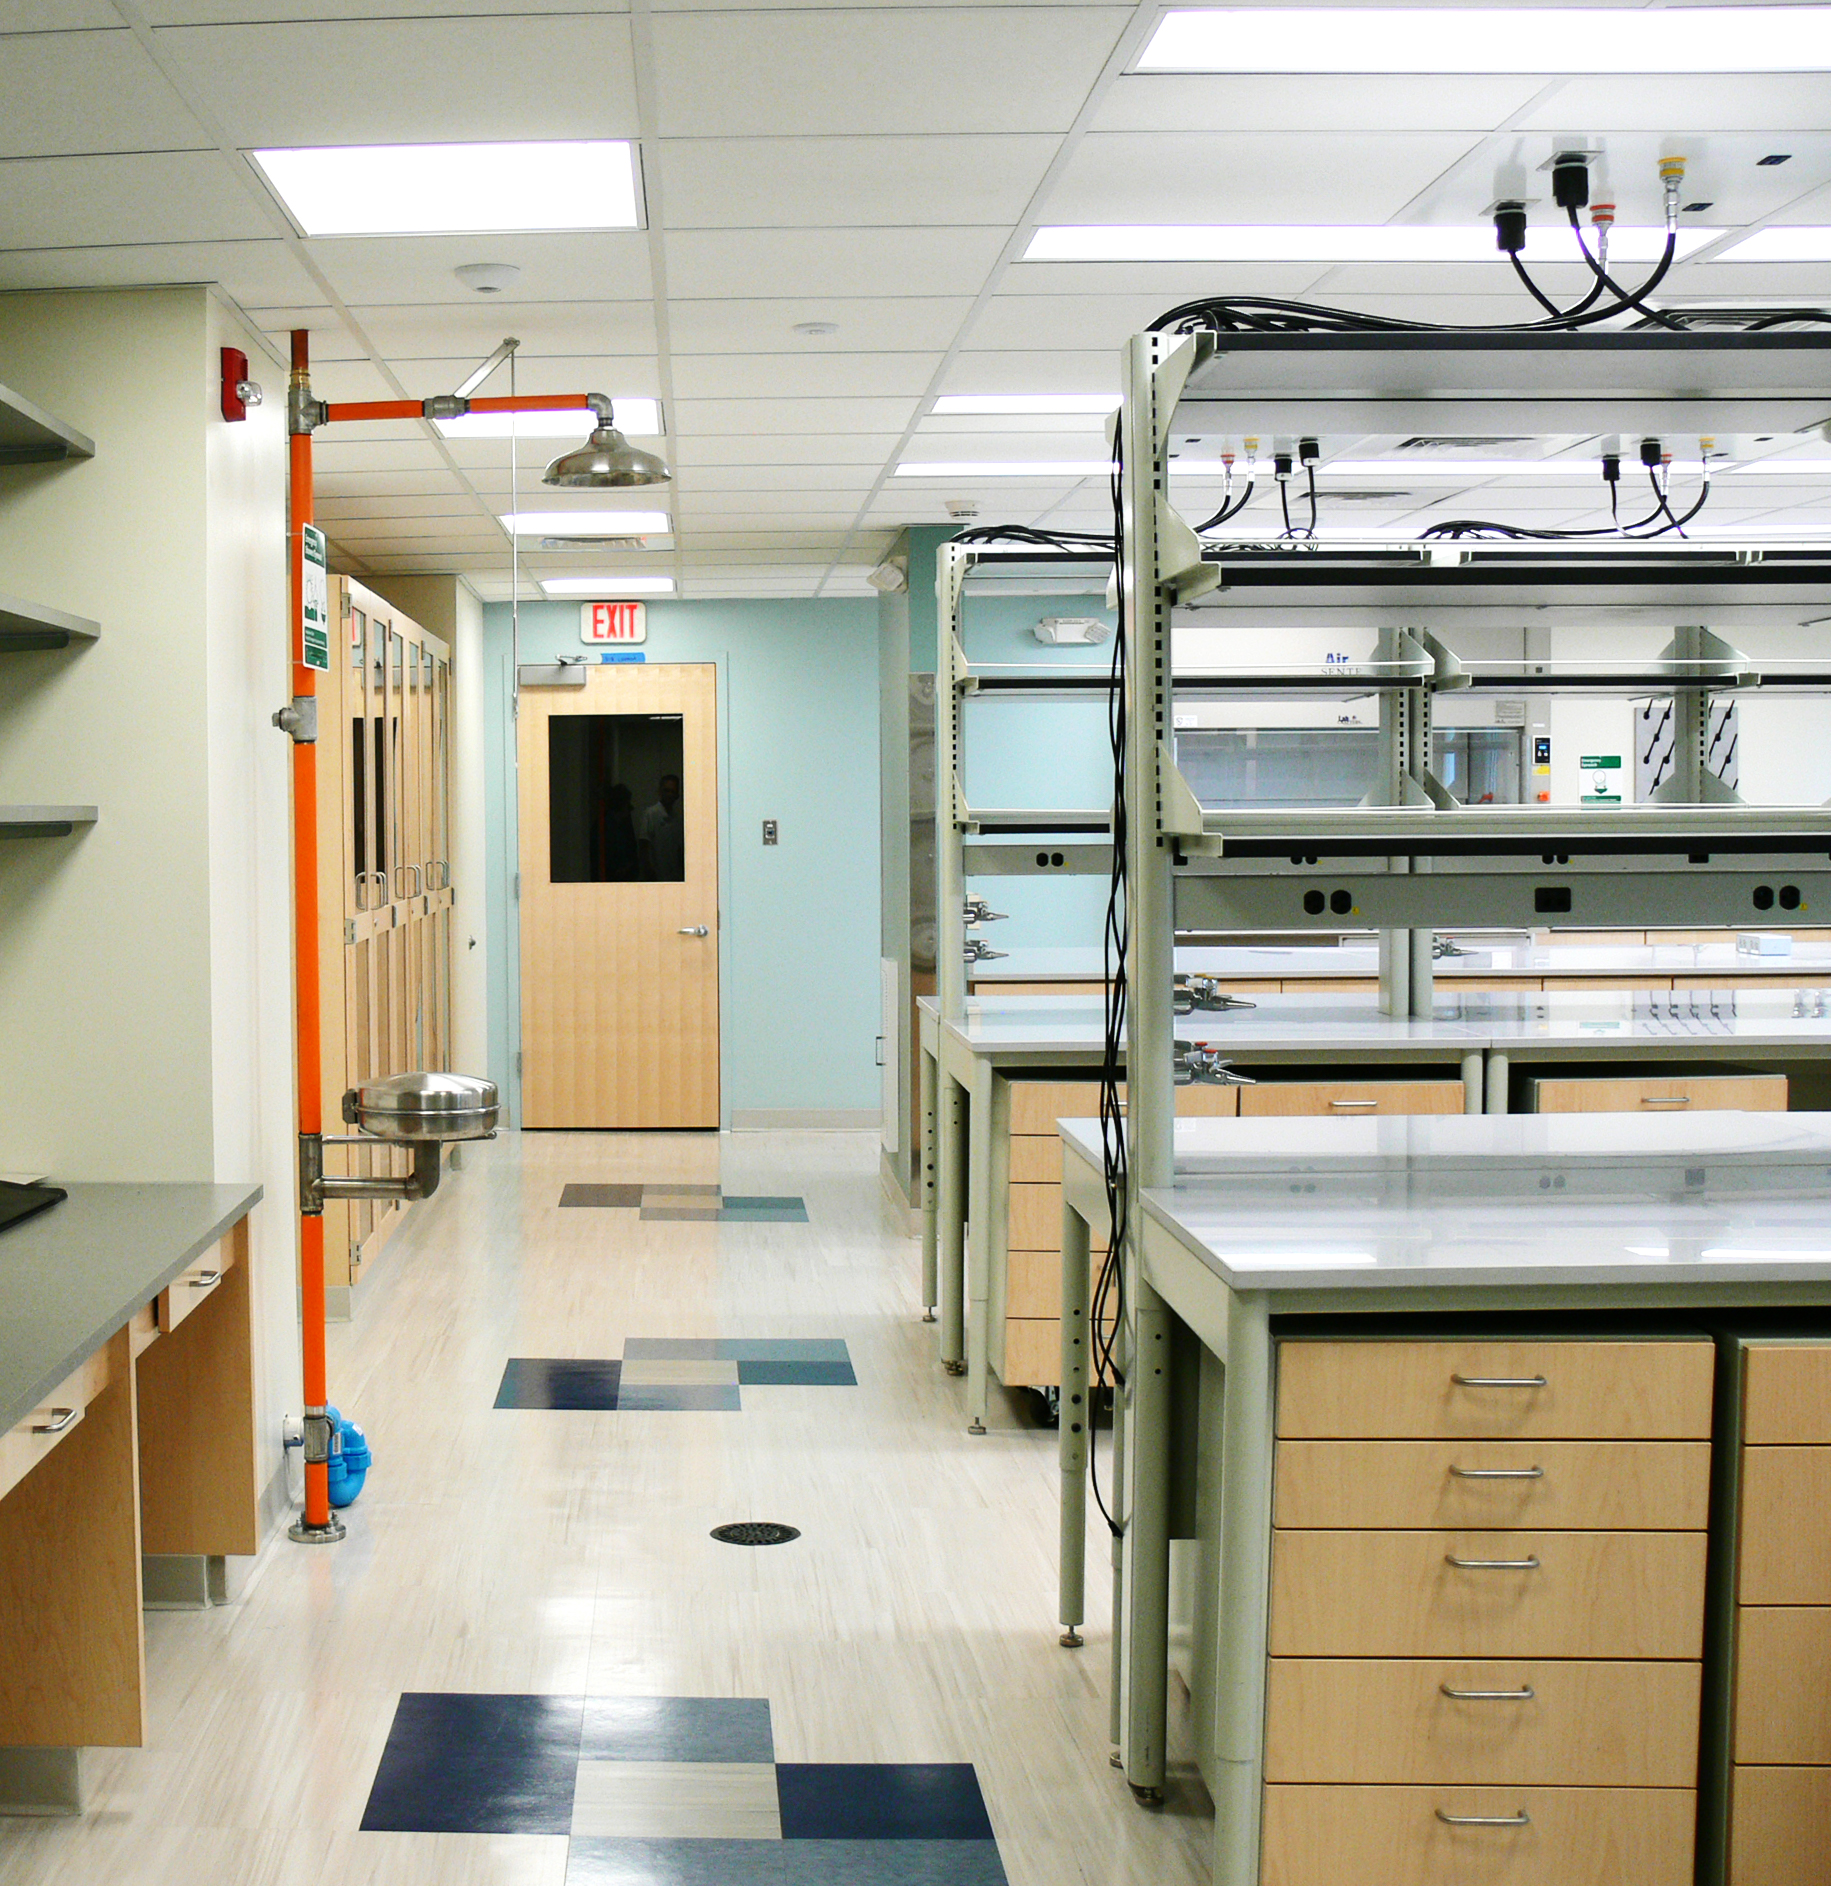 Interior, Morrill Research Laboratory at UMass Amherst, work stations, storage, door